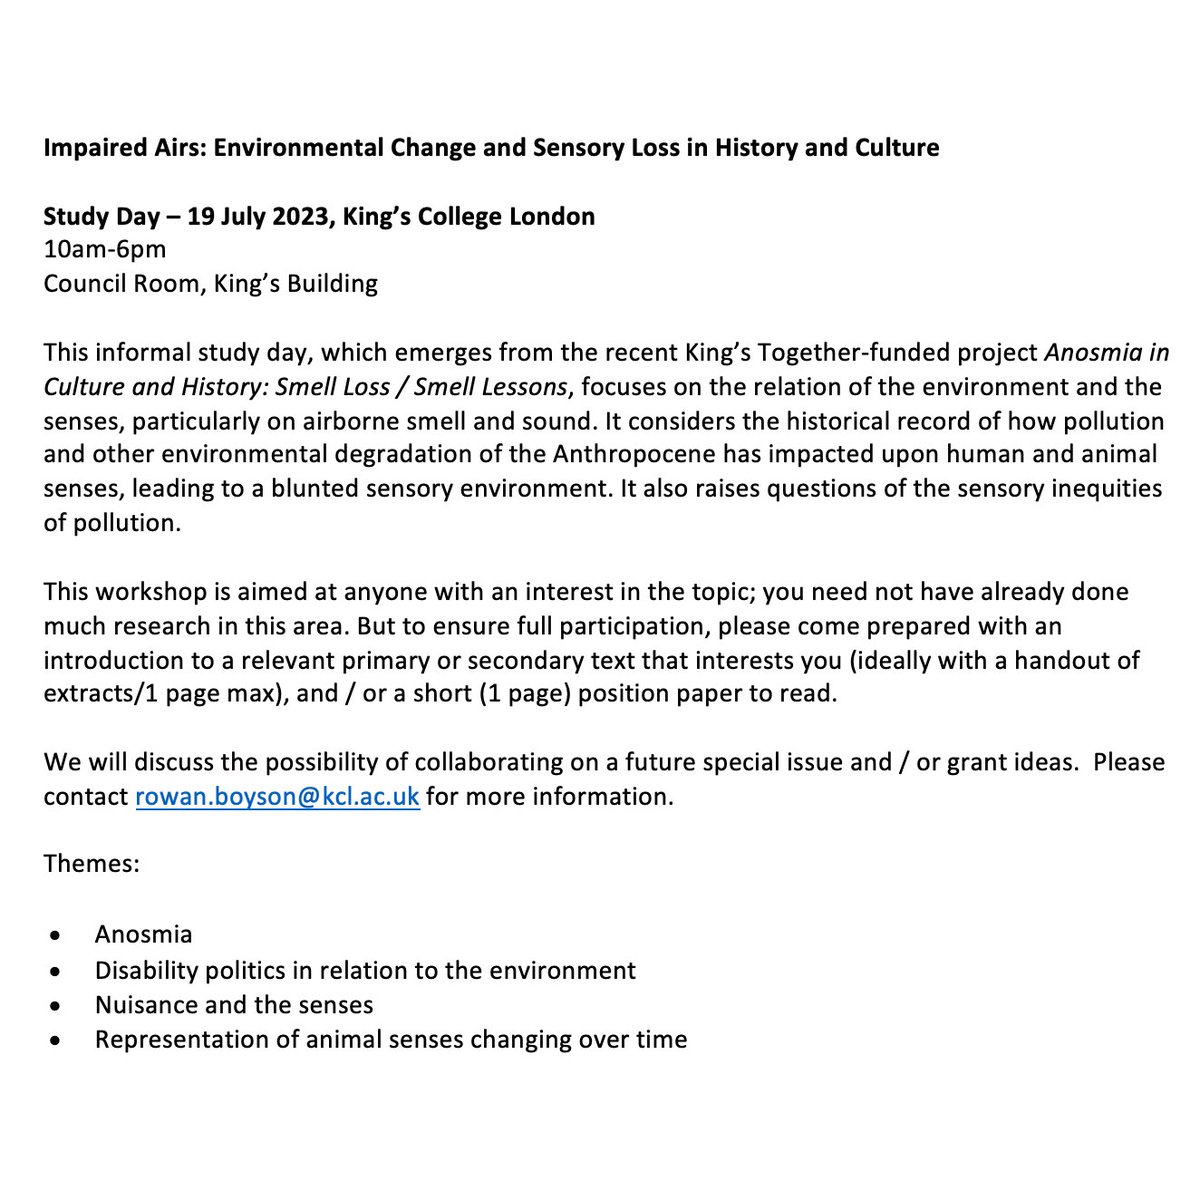 *CFP* We are hosting a study day on the environment and the senses at KCL on 19 July 2023. Please email Dr Rowan Boyson (rowan.boyson@kcl.ac.uk) to enquire about joining us!